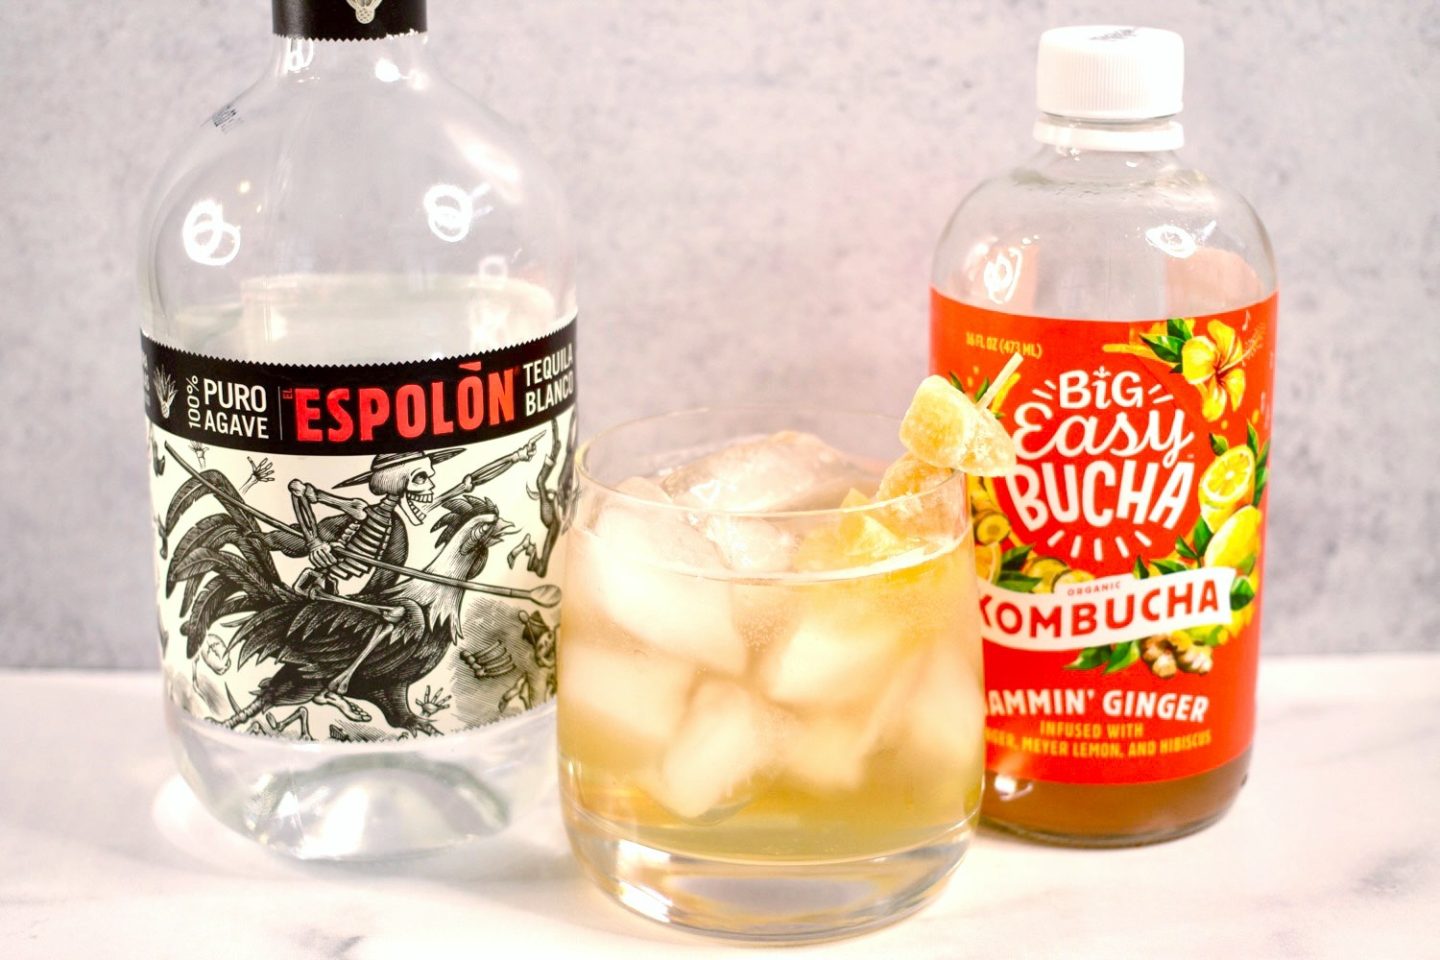 Mexican Mule Ingredients, bottle of Espolòn tequila and bottle of Big Easy Buchcha with the cocktail in between